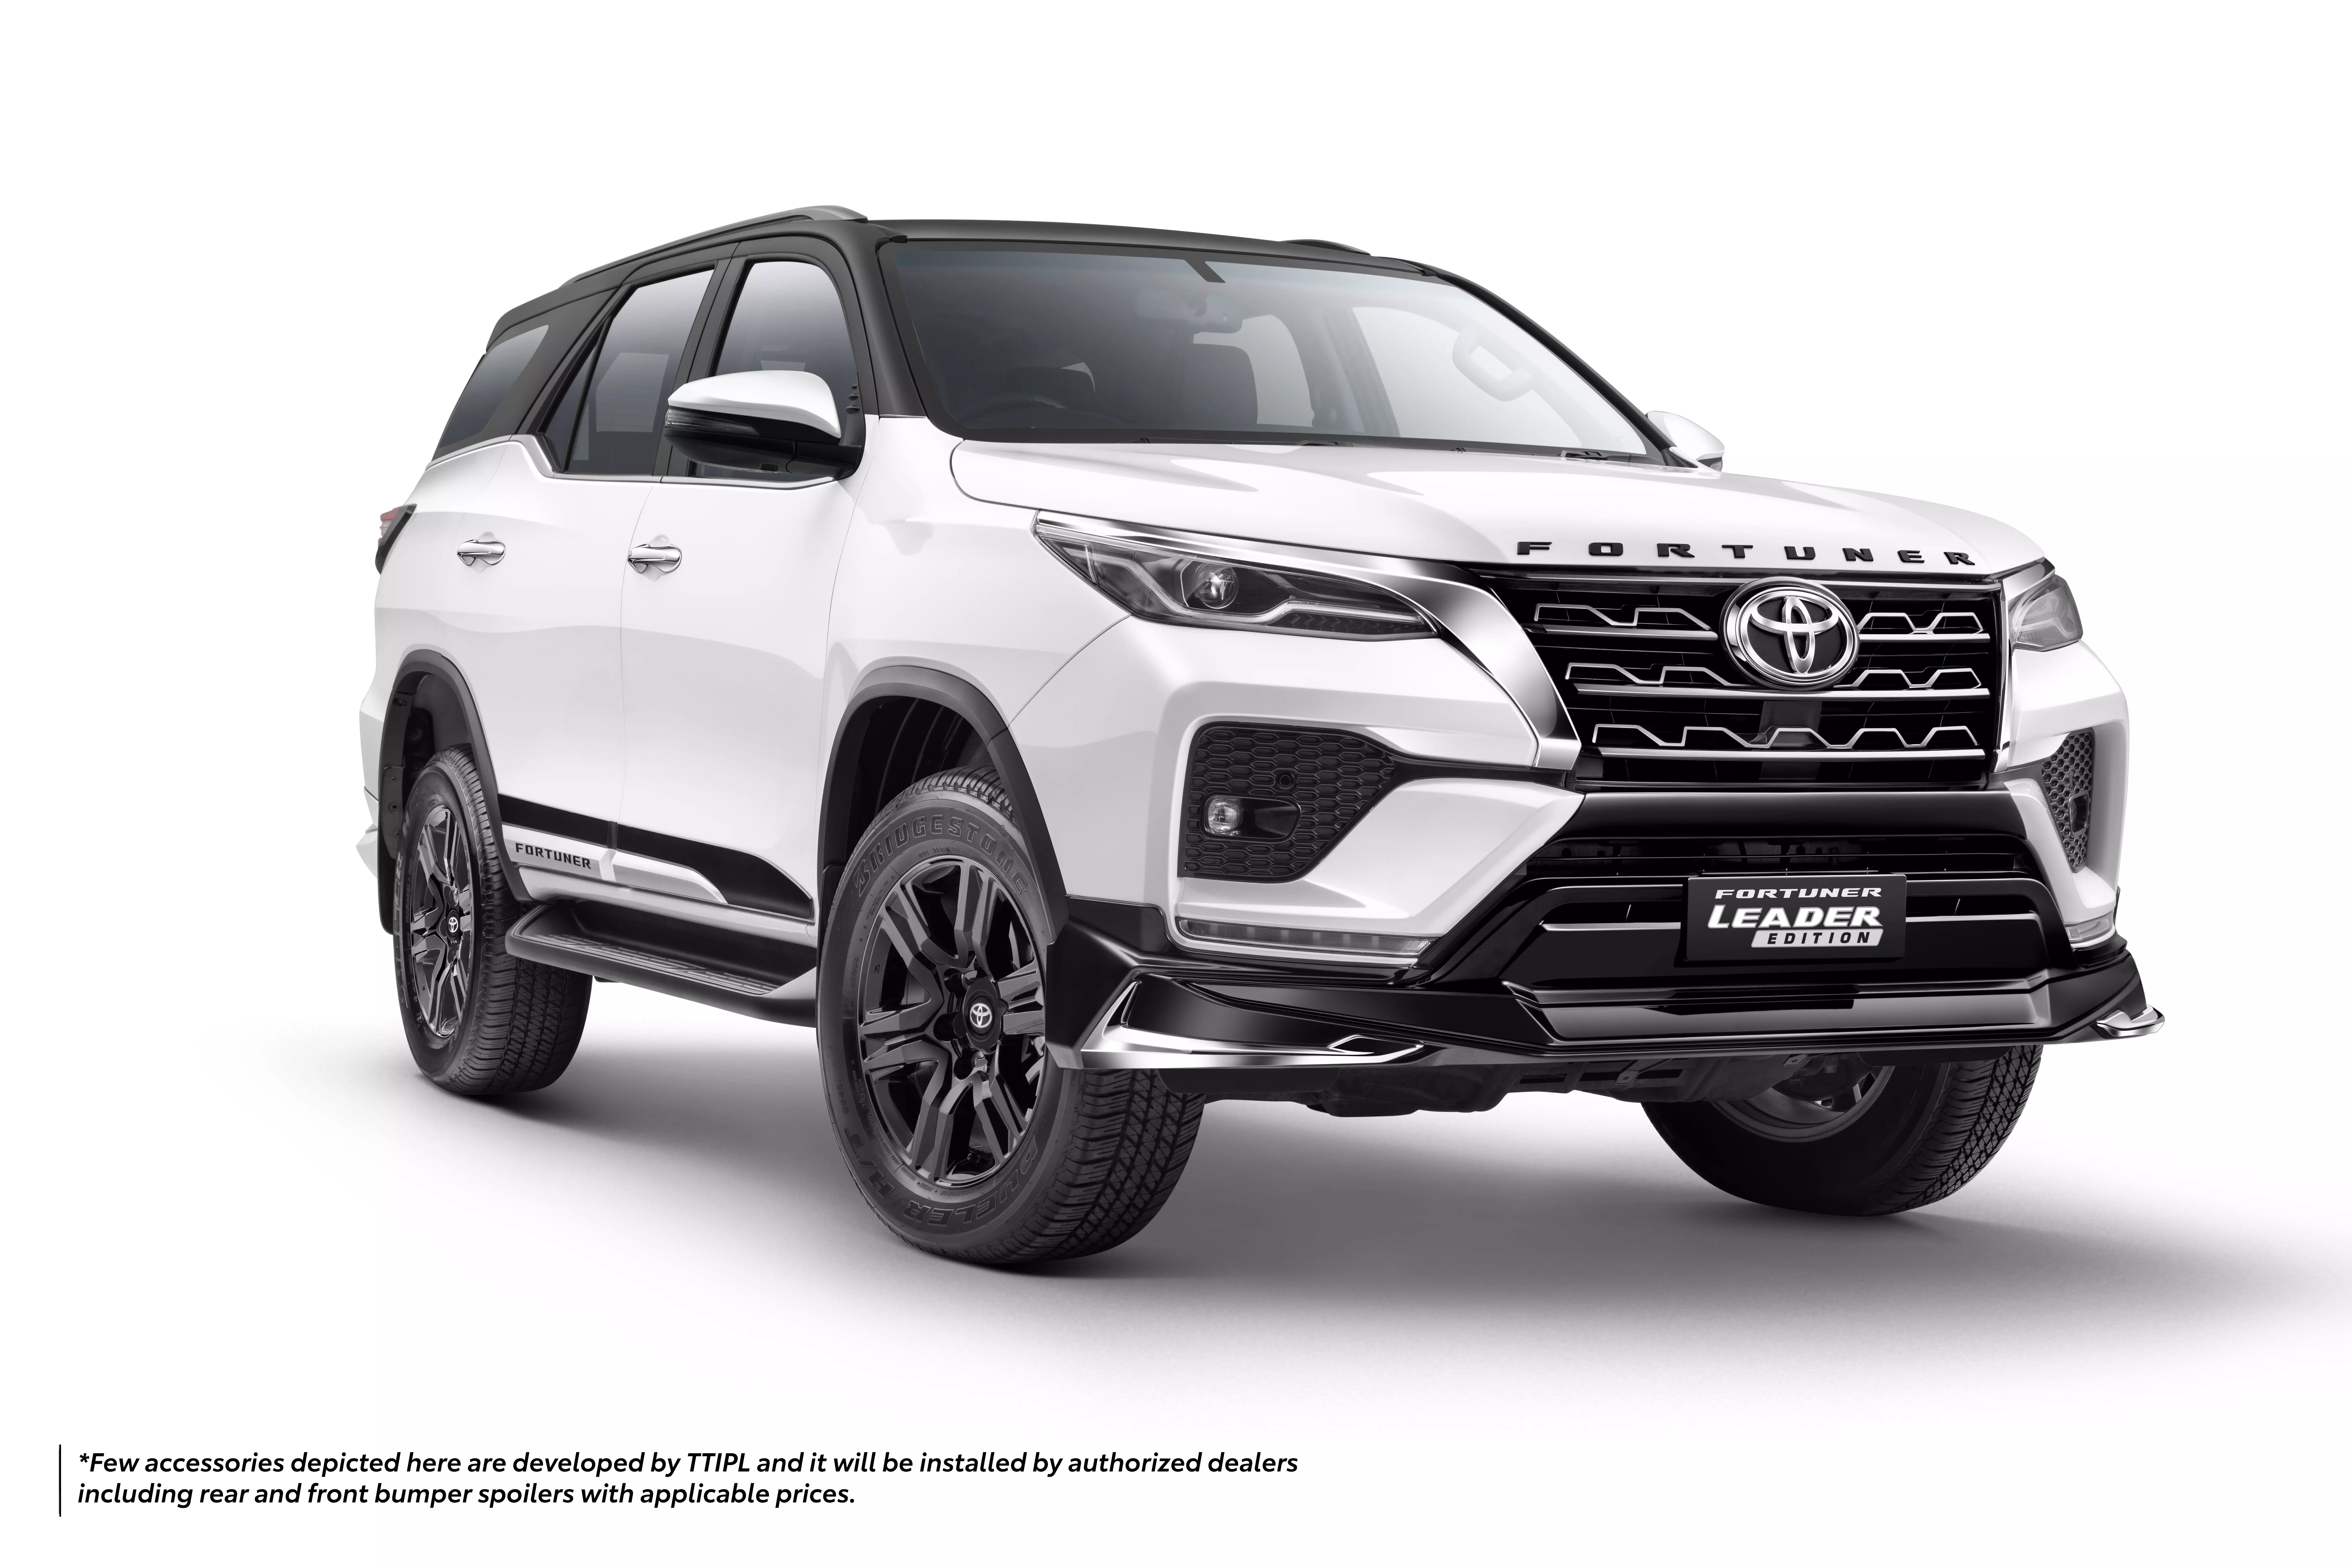 Toyota Fortuner Leader Edition Launched